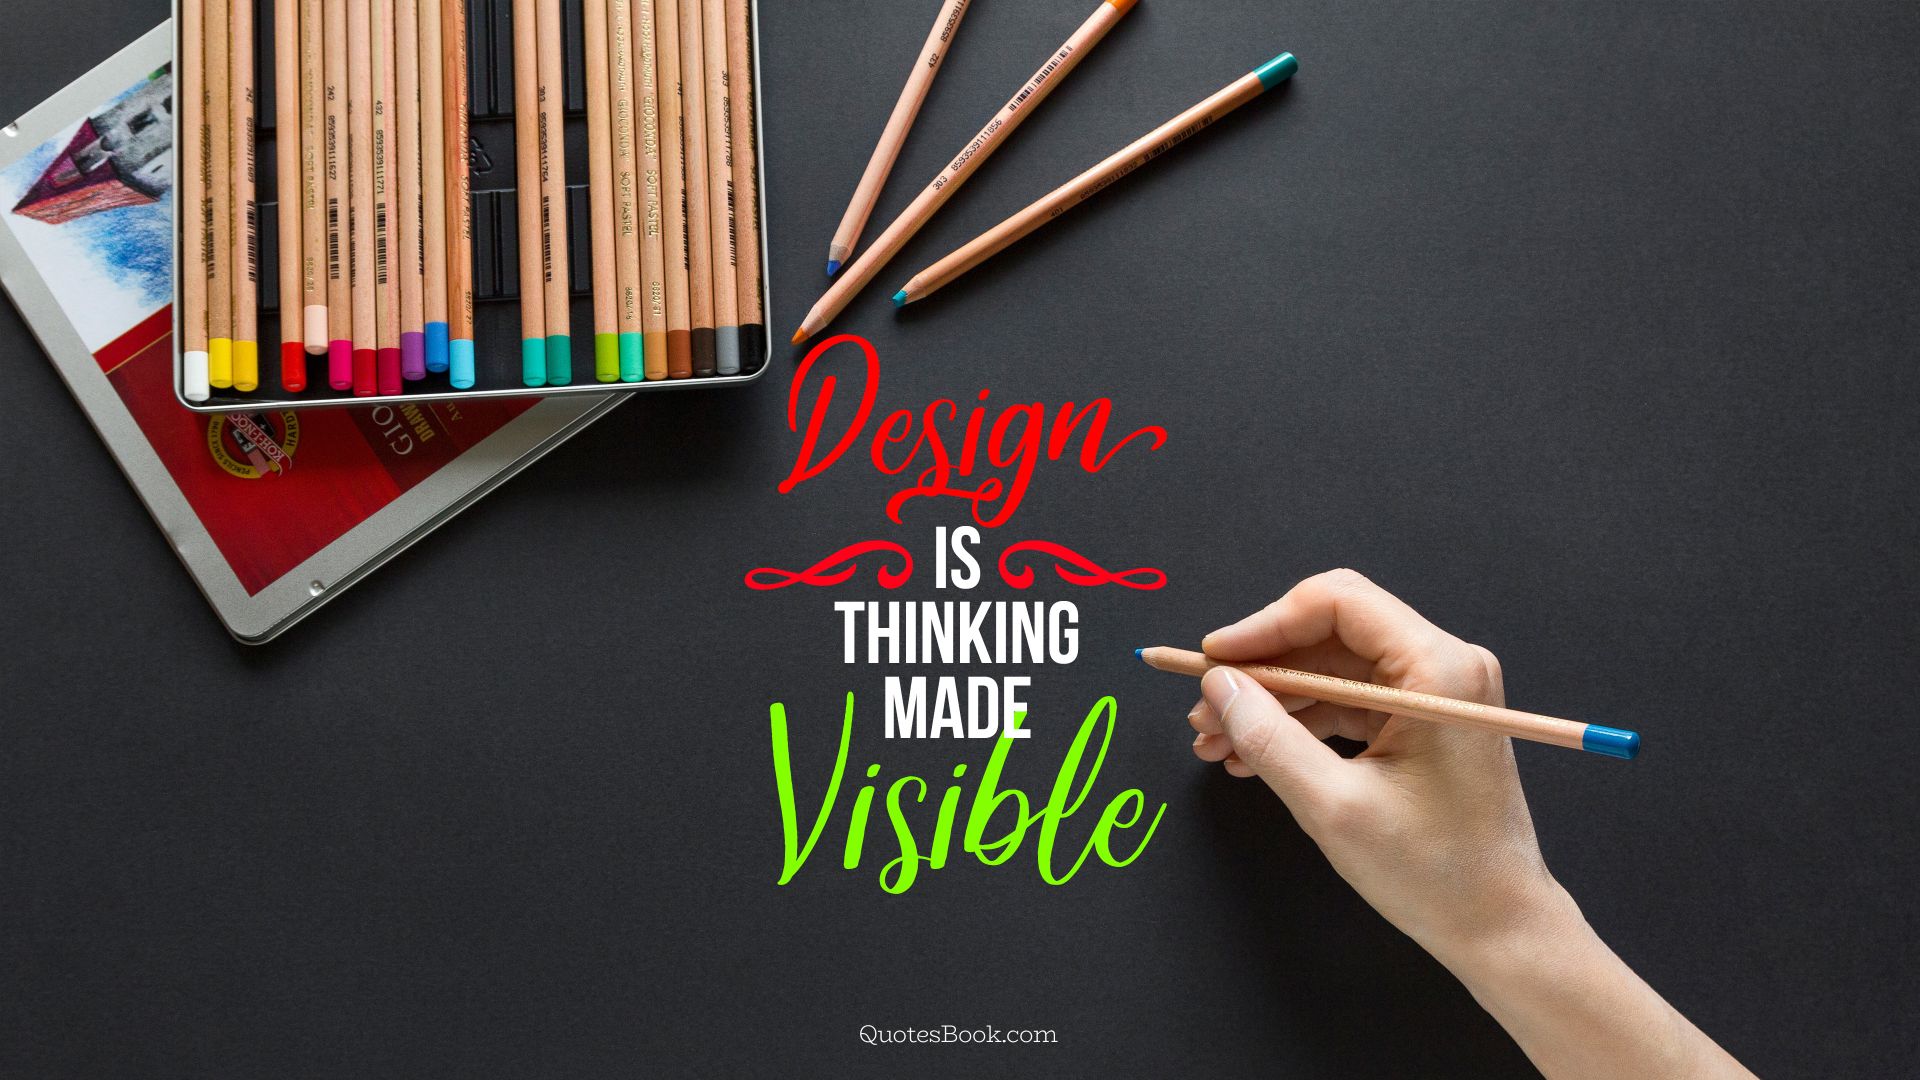 Design is thinking made visible